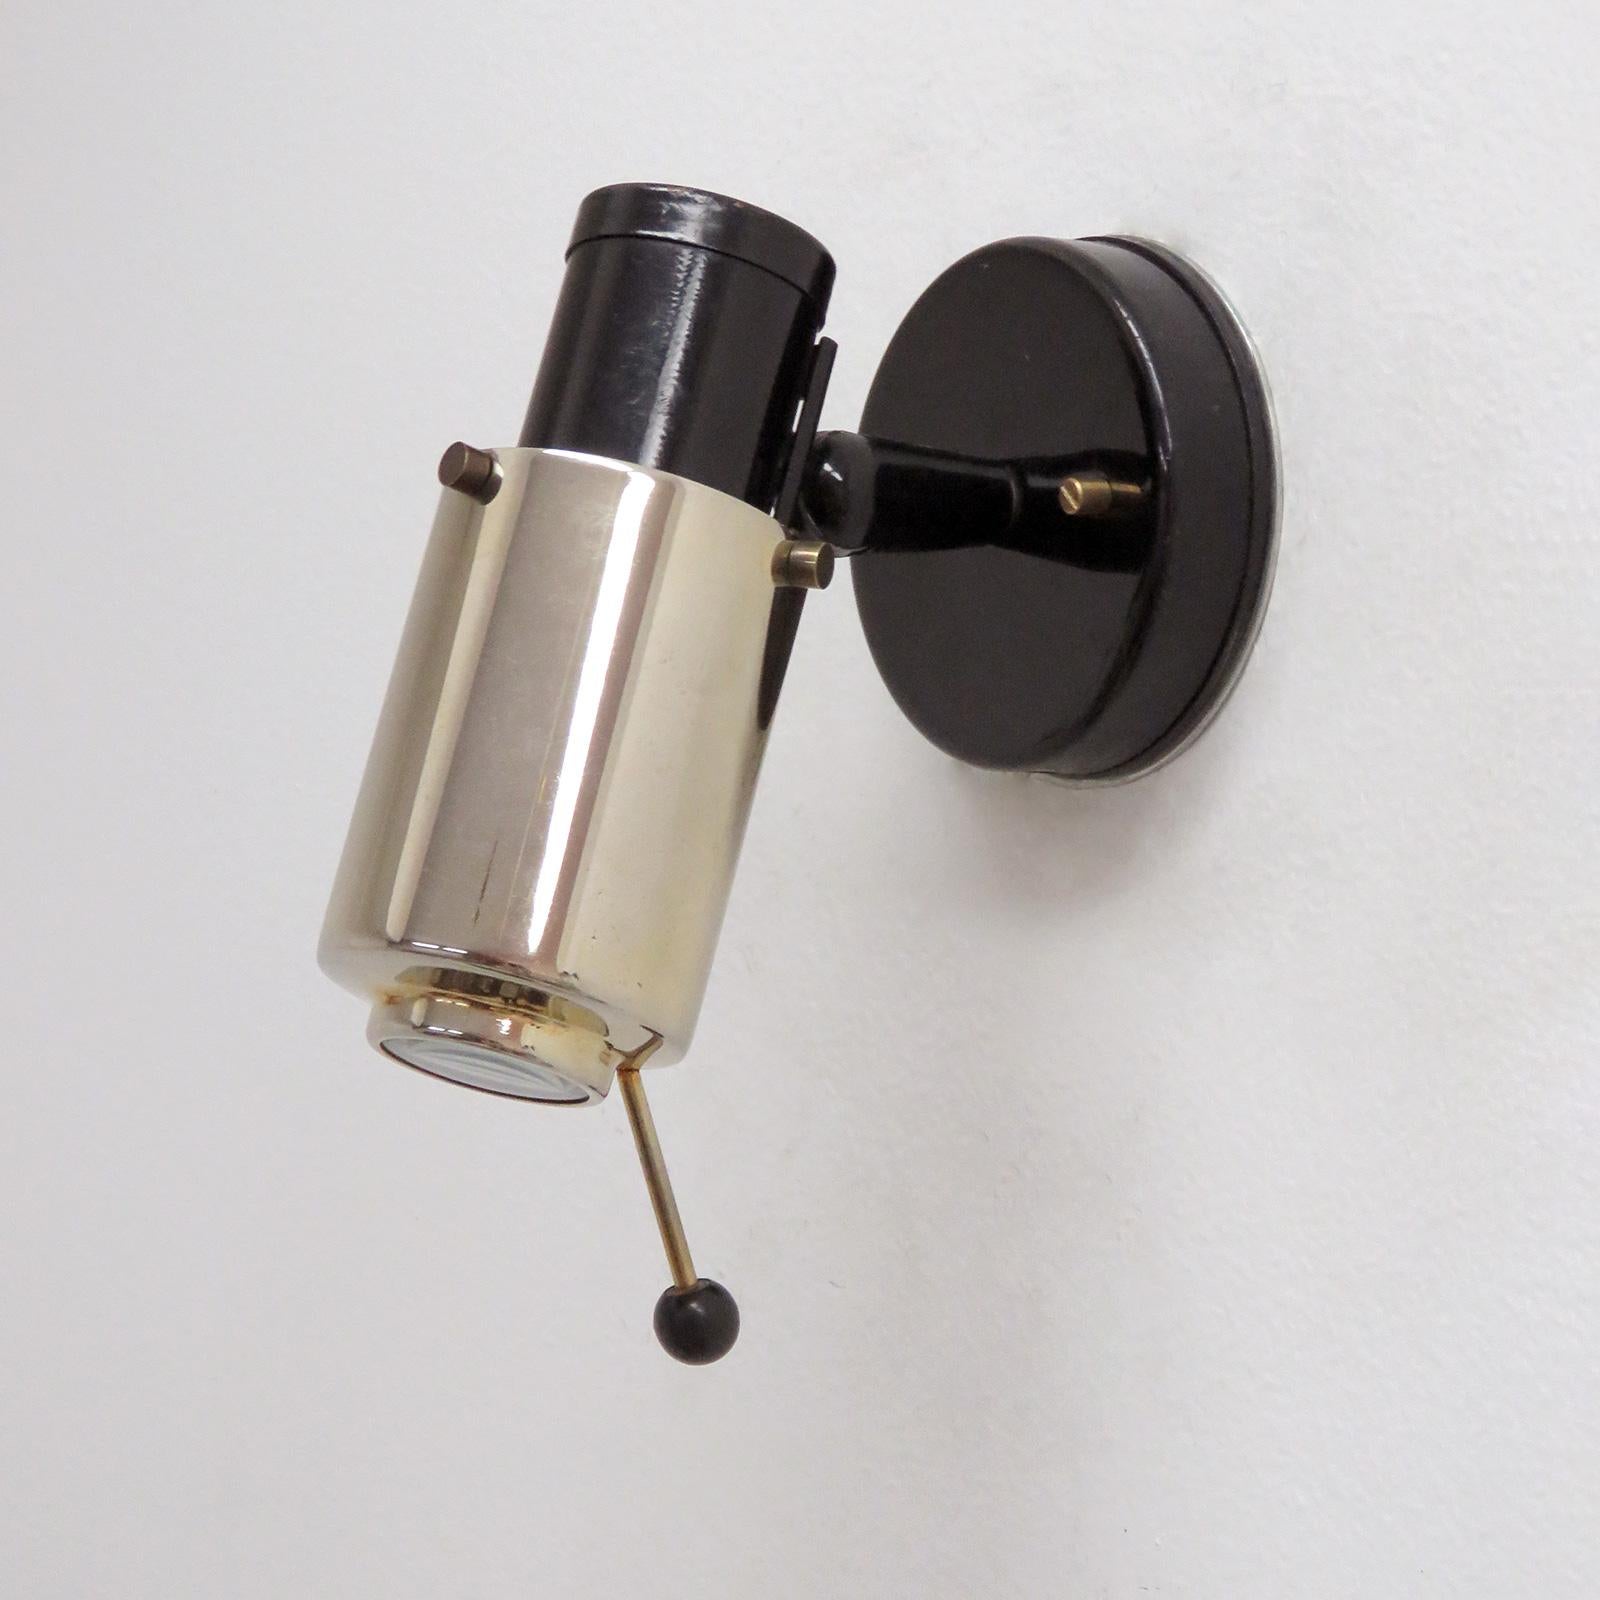 Pair of brass and black enameled wall lights by Jacques Biny for Lita with magnifying lens, handle to adjust angle and direction, provision for on/off pull switch, marked.